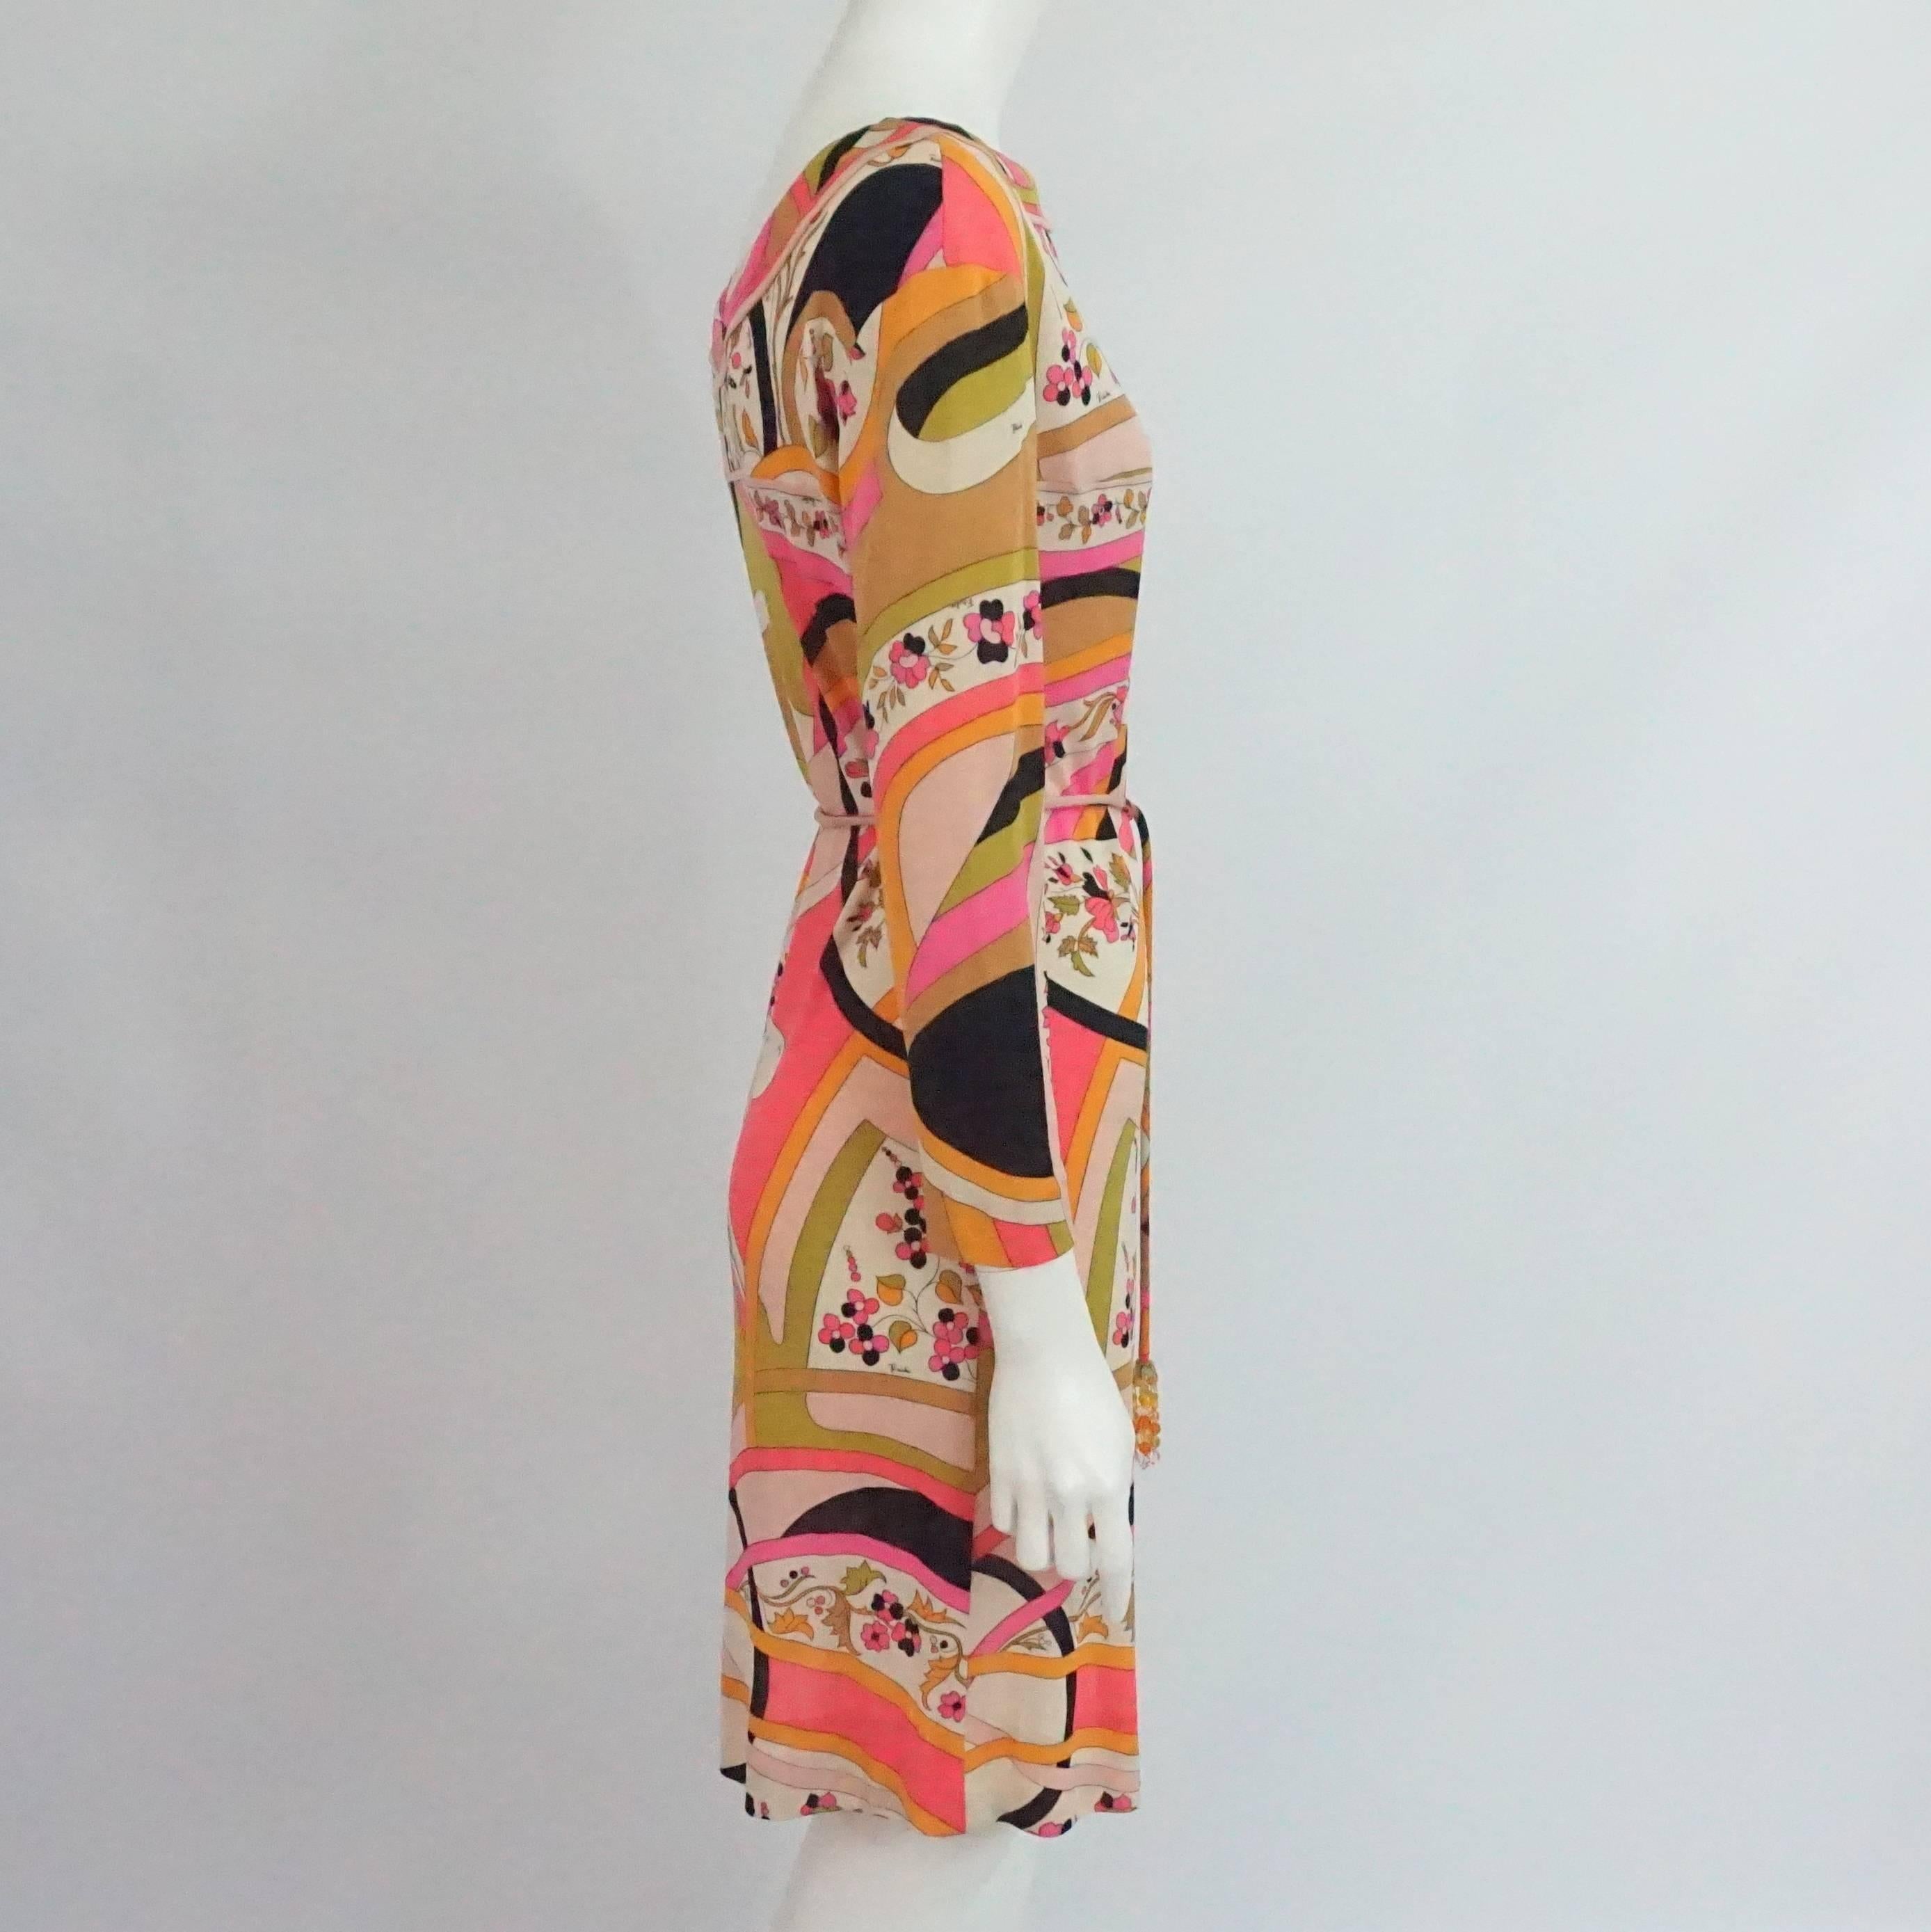 Emilio Pucci Multi Silk Jersey Geometric Print Dress with Belt - 8 - 1960's. This timeless dress is a great pop of color for tropical trip to warm weather. It features a geometric & floral print, bracelet sleeve, drop sleeves, tapered fit, and thin